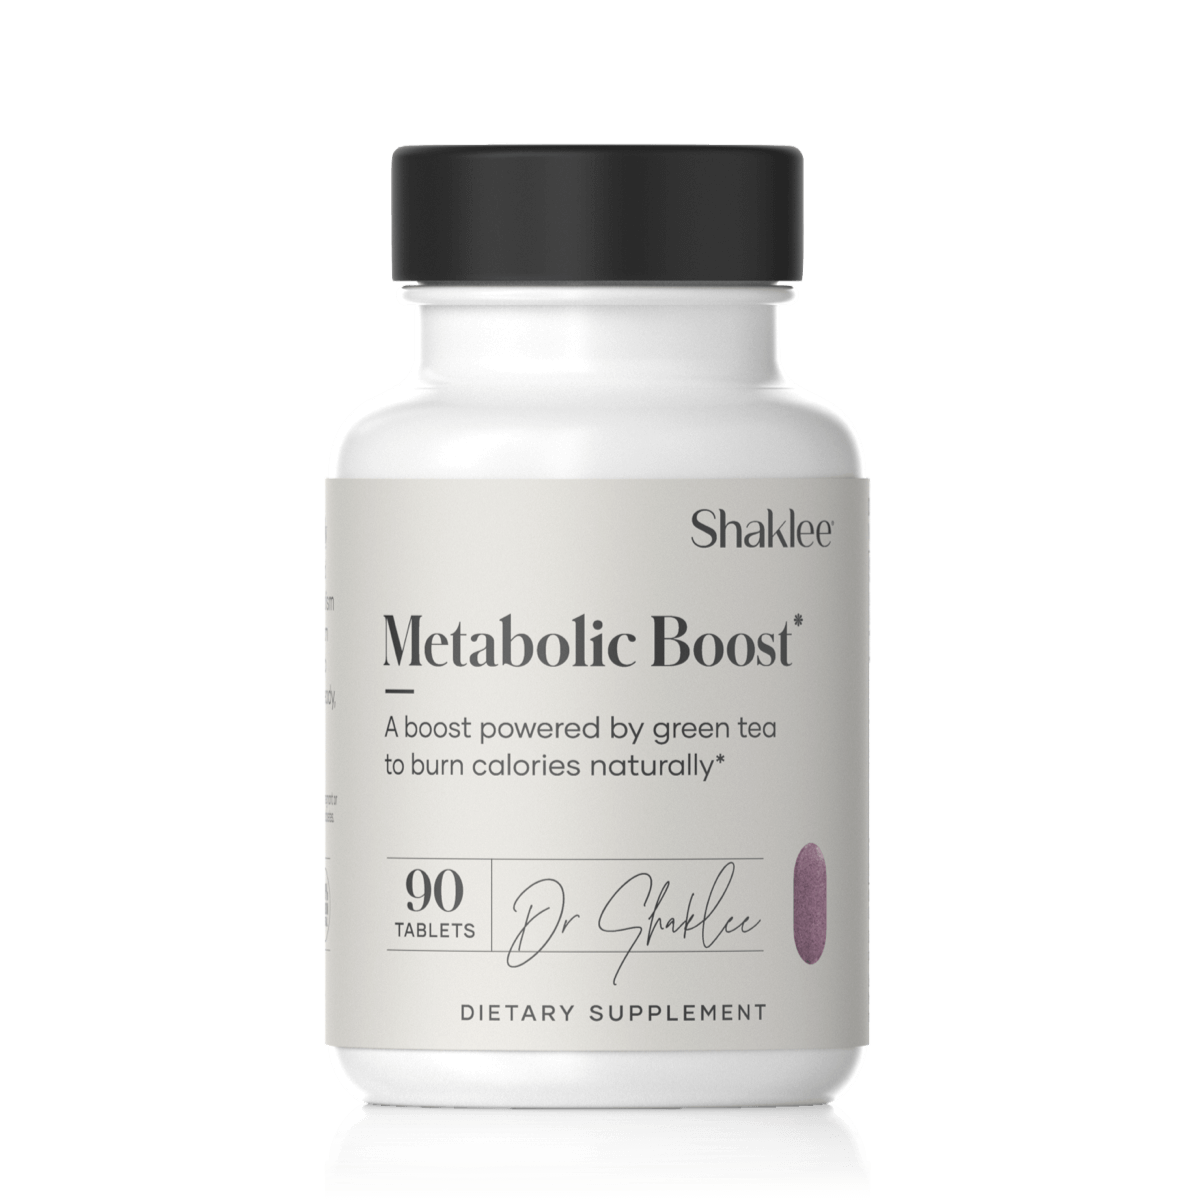 180 Metabolic Boost* Supplement with Green Tea